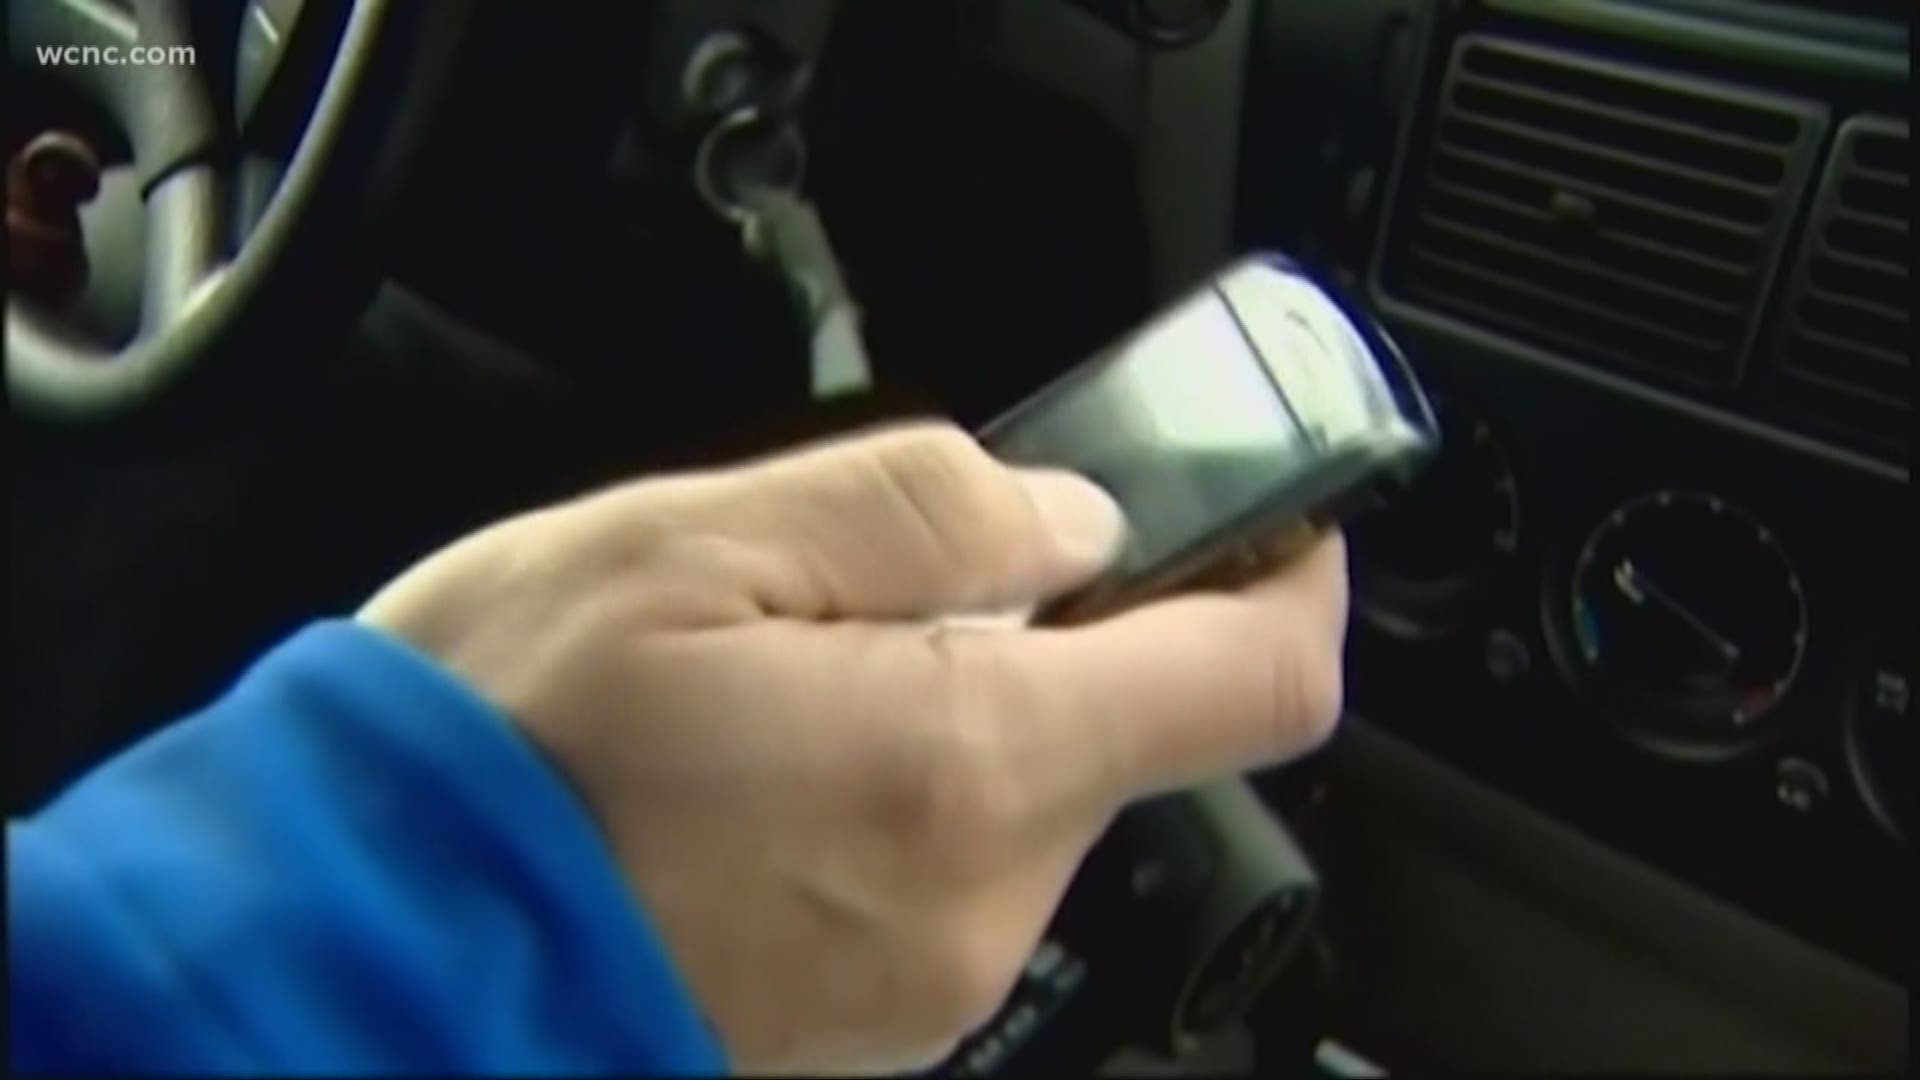 In 2018, there were 123 deaths in North Carolina attributed to distracted driving. And now lawmakers are hoping to put an end to those crashes with a new bill.